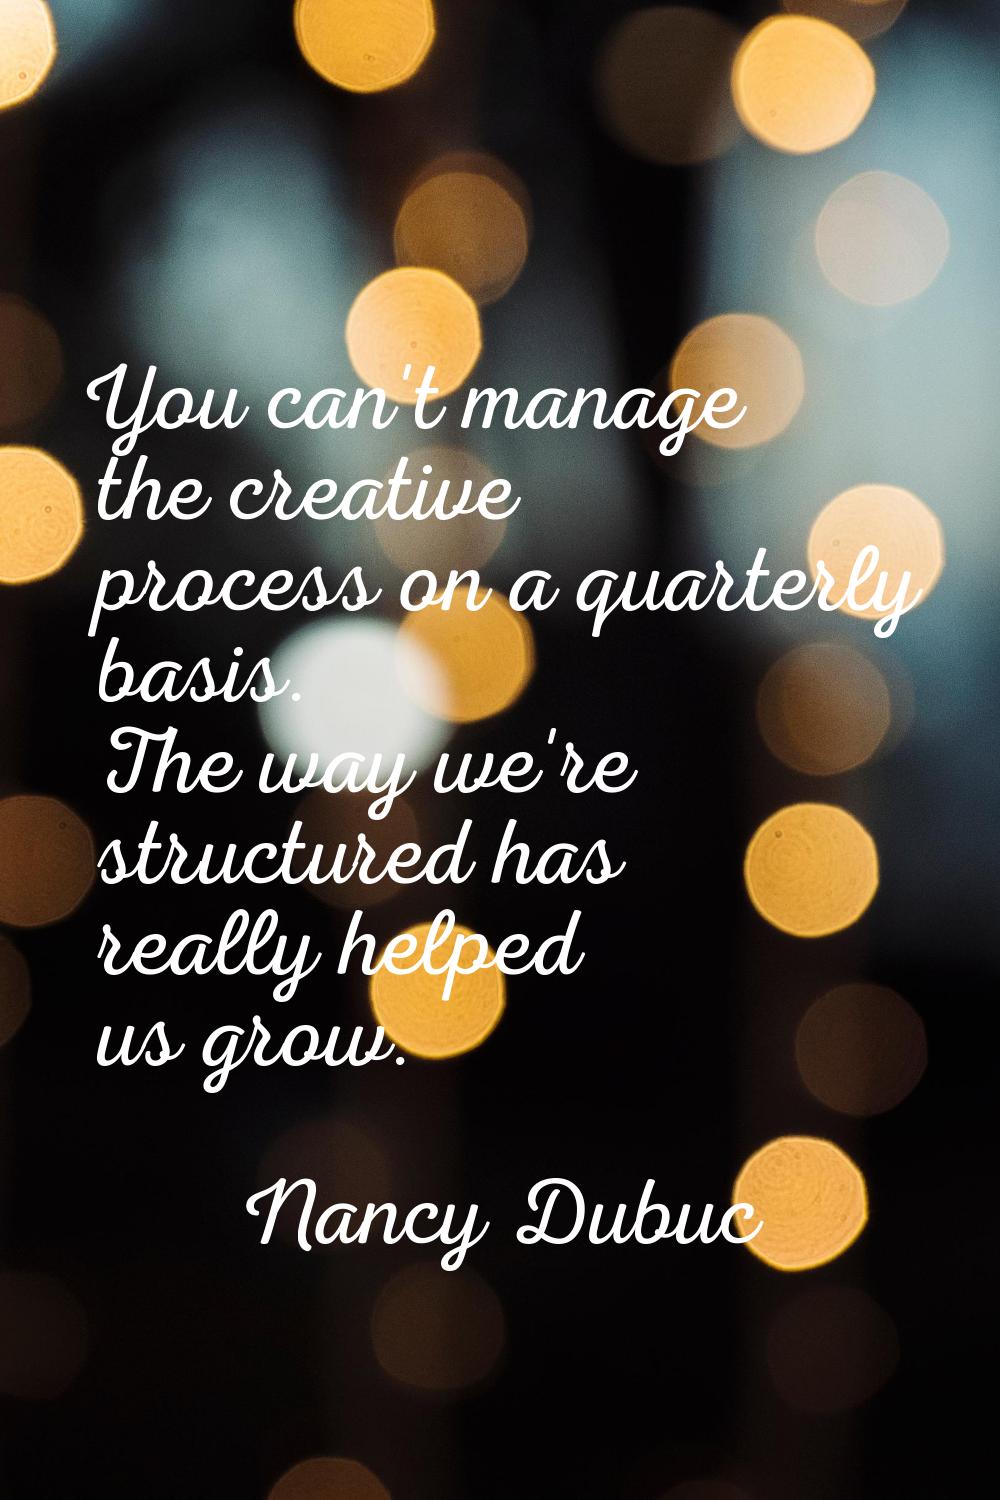 You can't manage the creative process on a quarterly basis. The way we're structured has really hel